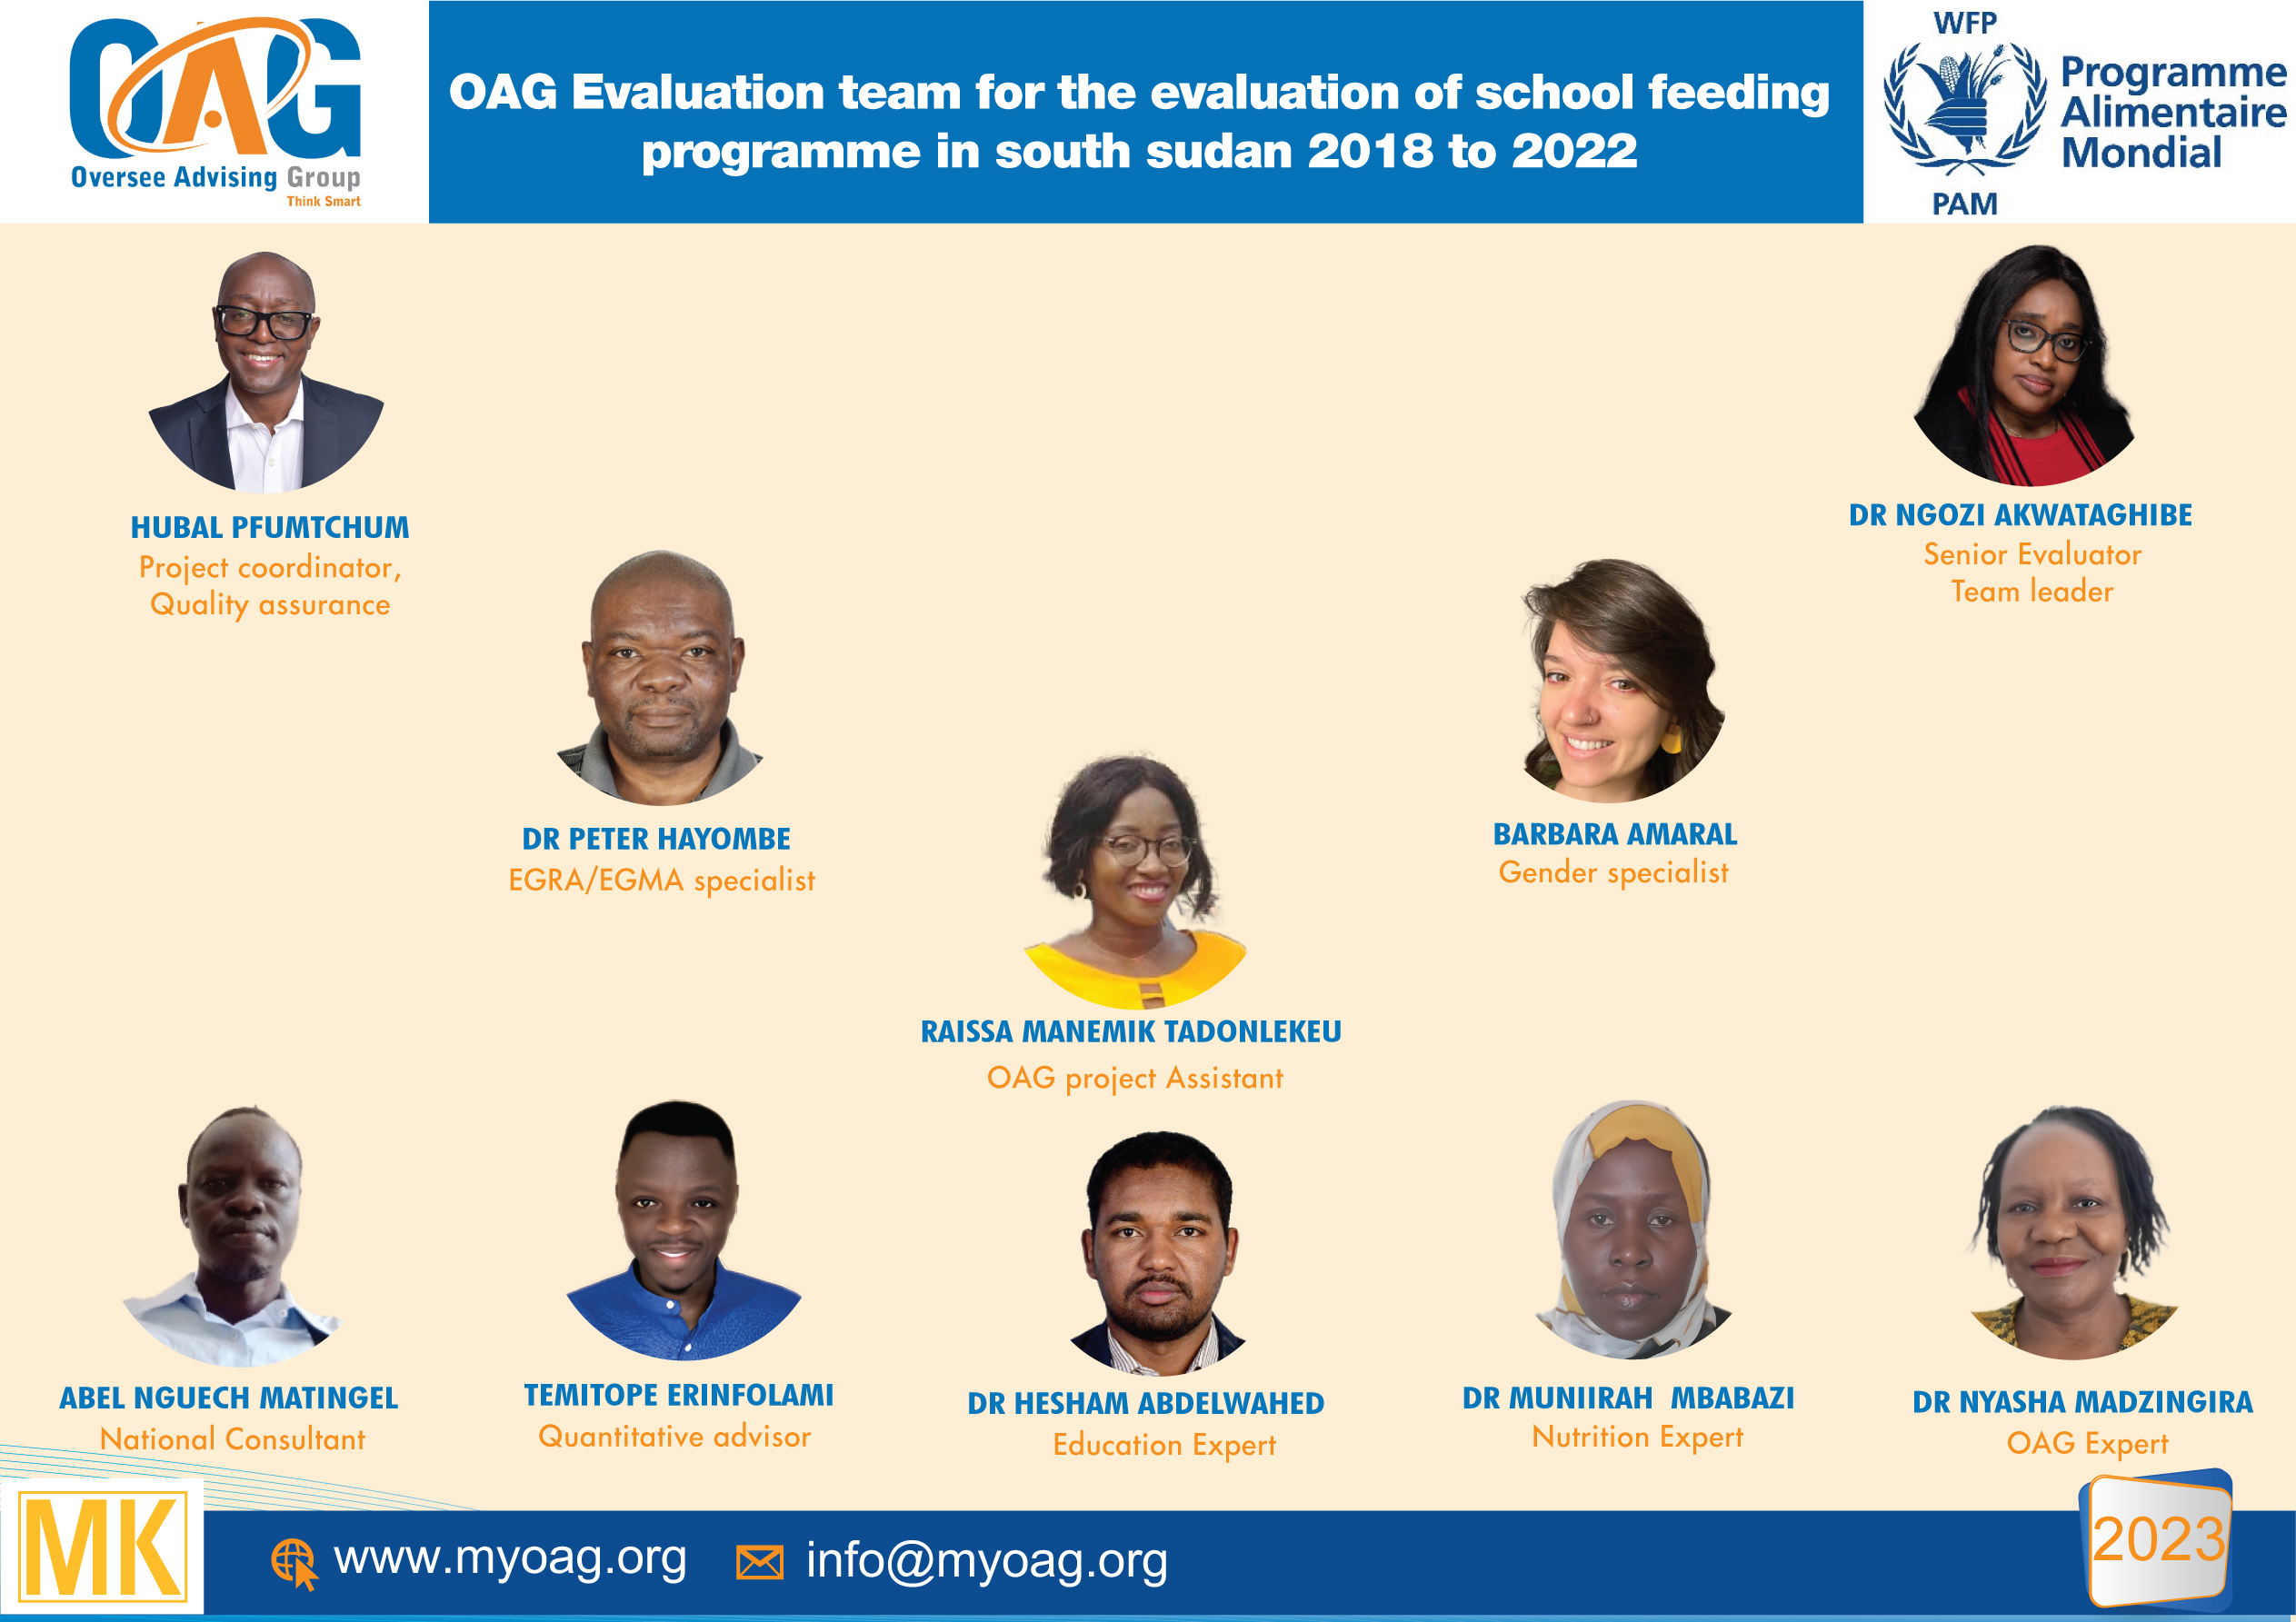 Let clap hands for the commitment of OAG team for the evaluation of school feeding programme in south Sudan 2018 to 2022